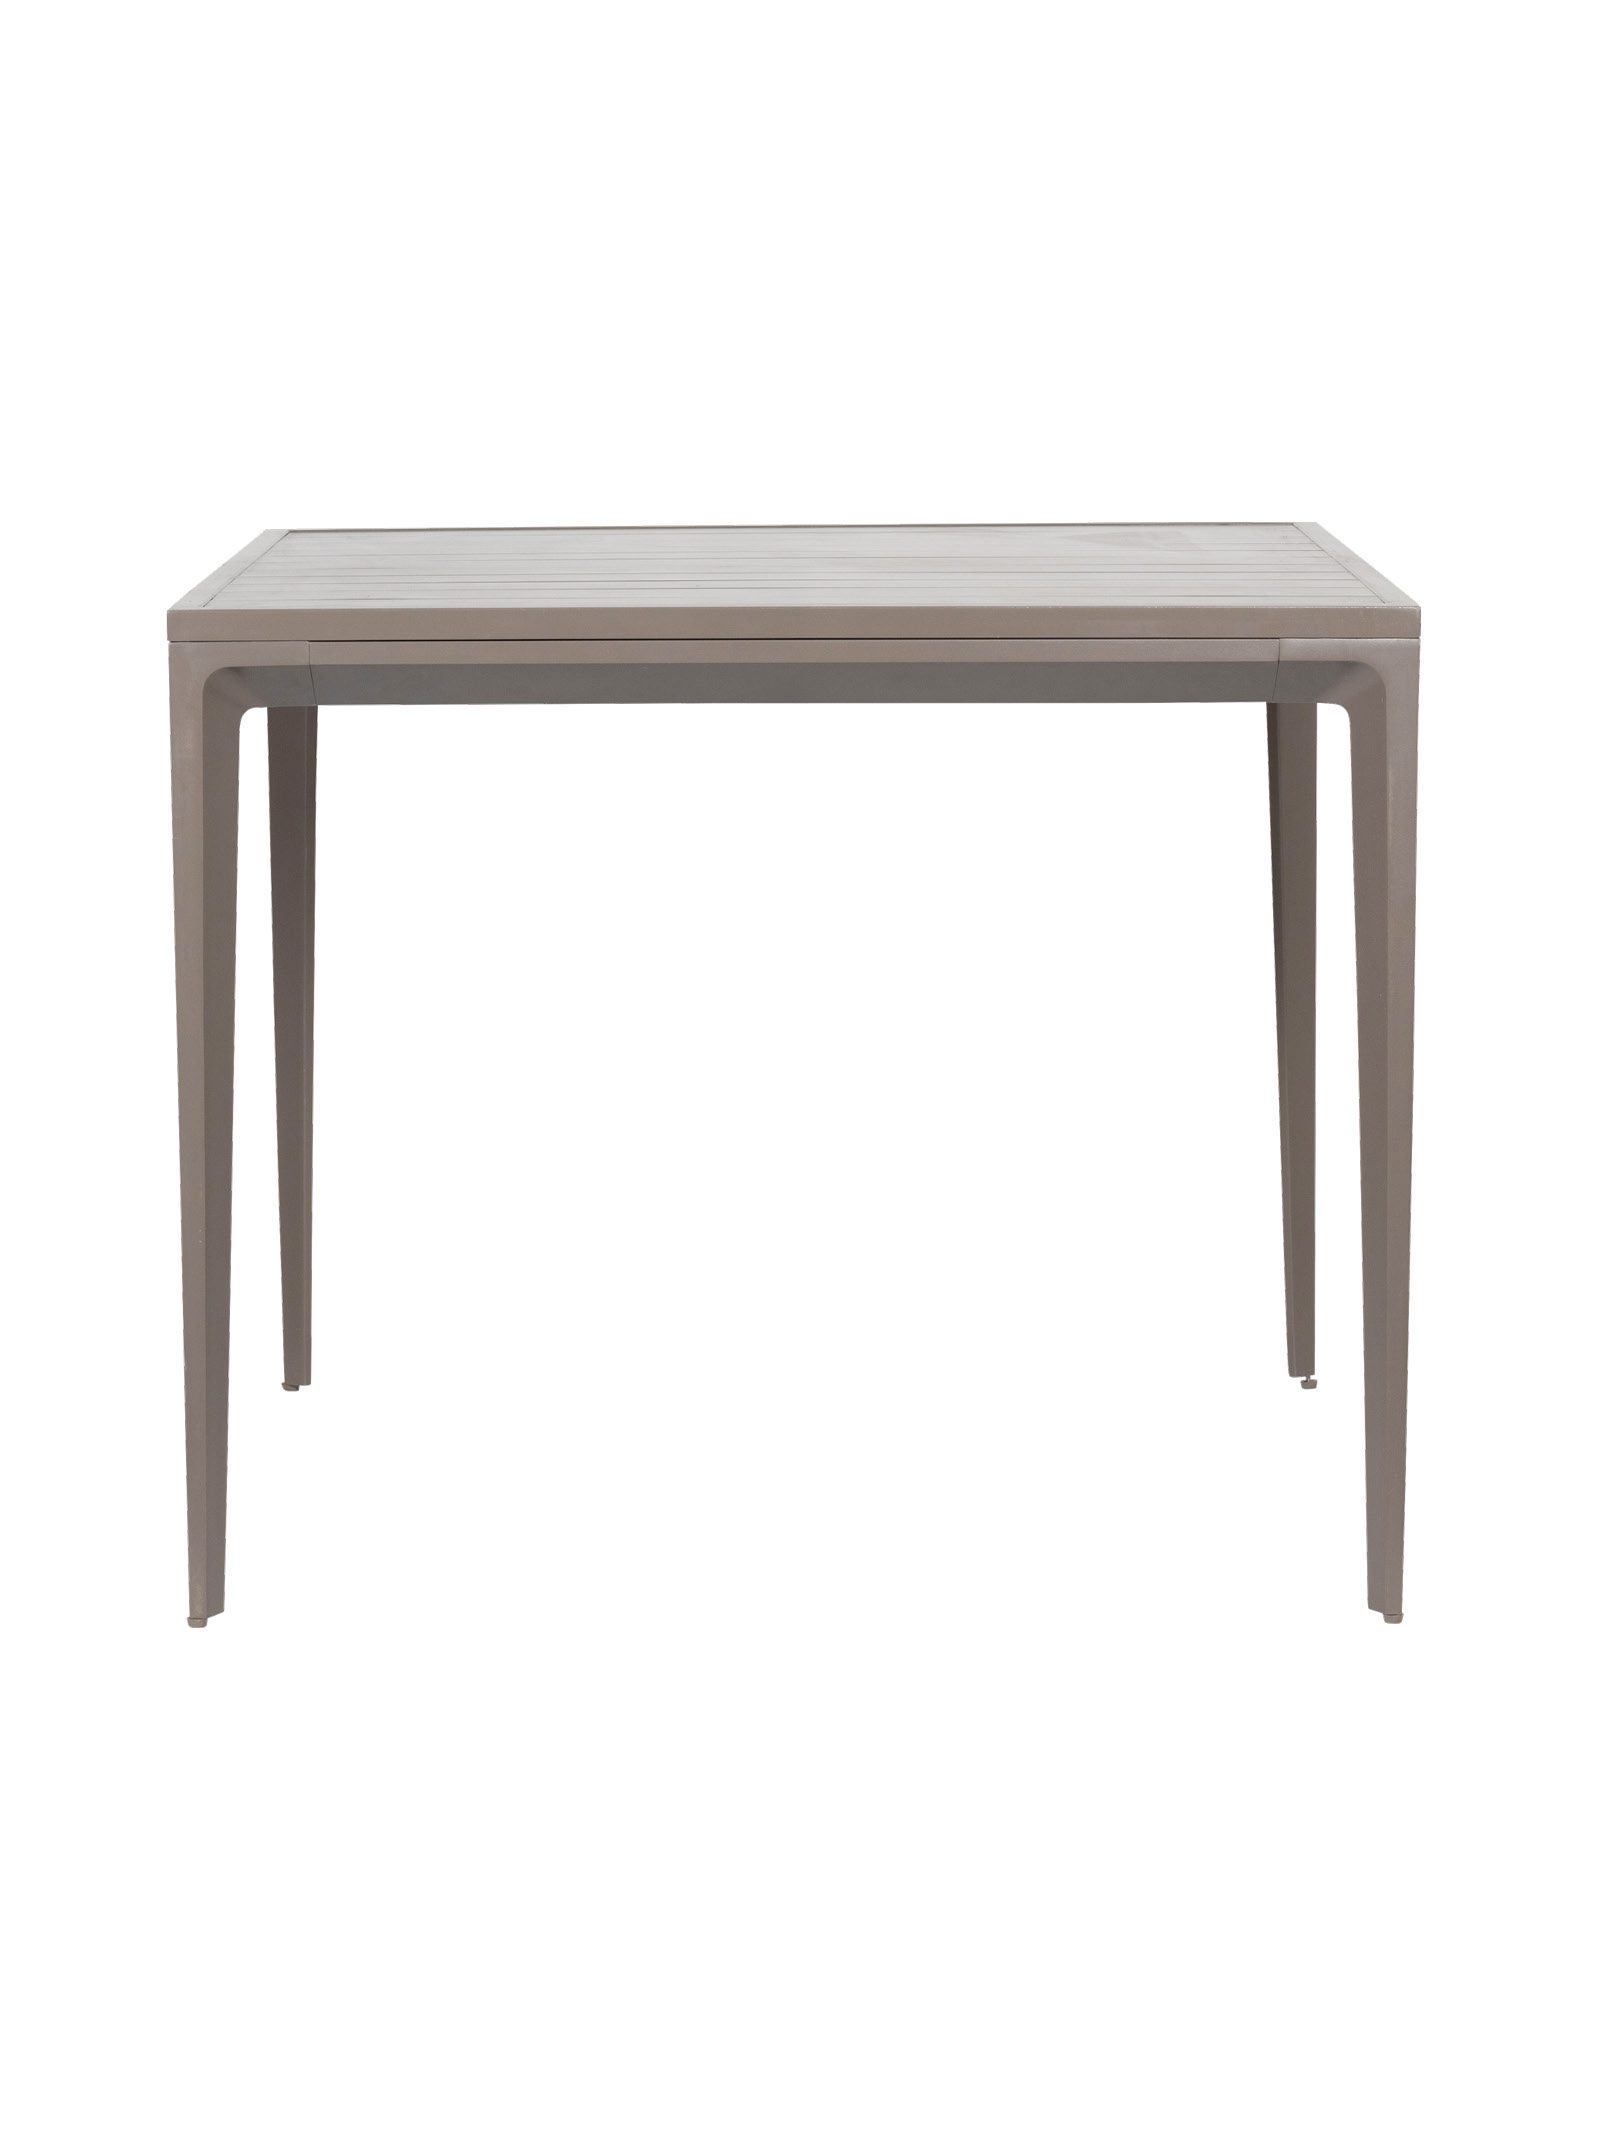 Kruger Outdoor 4-Seater Dining Table in Dune